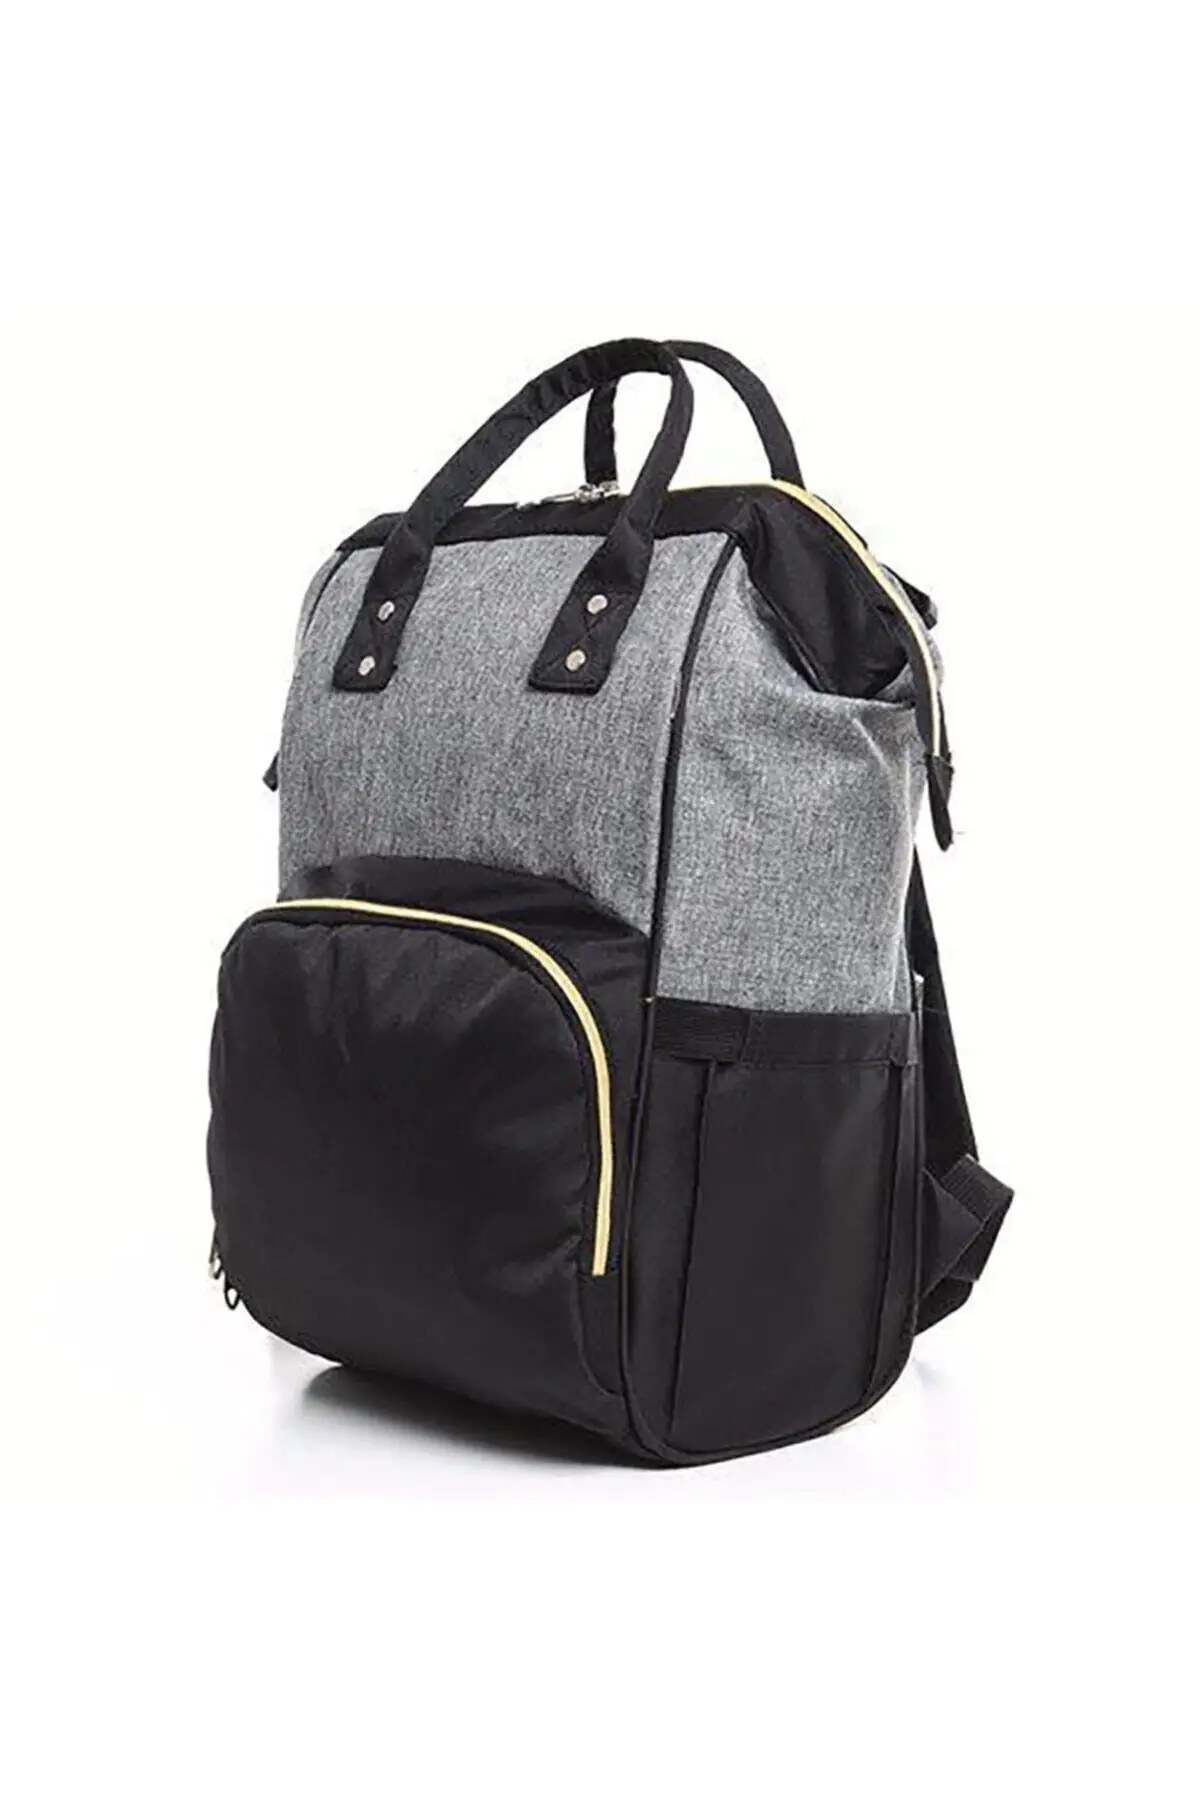 Baby Bag, Baby Mommy Backpack Black Gray Gold